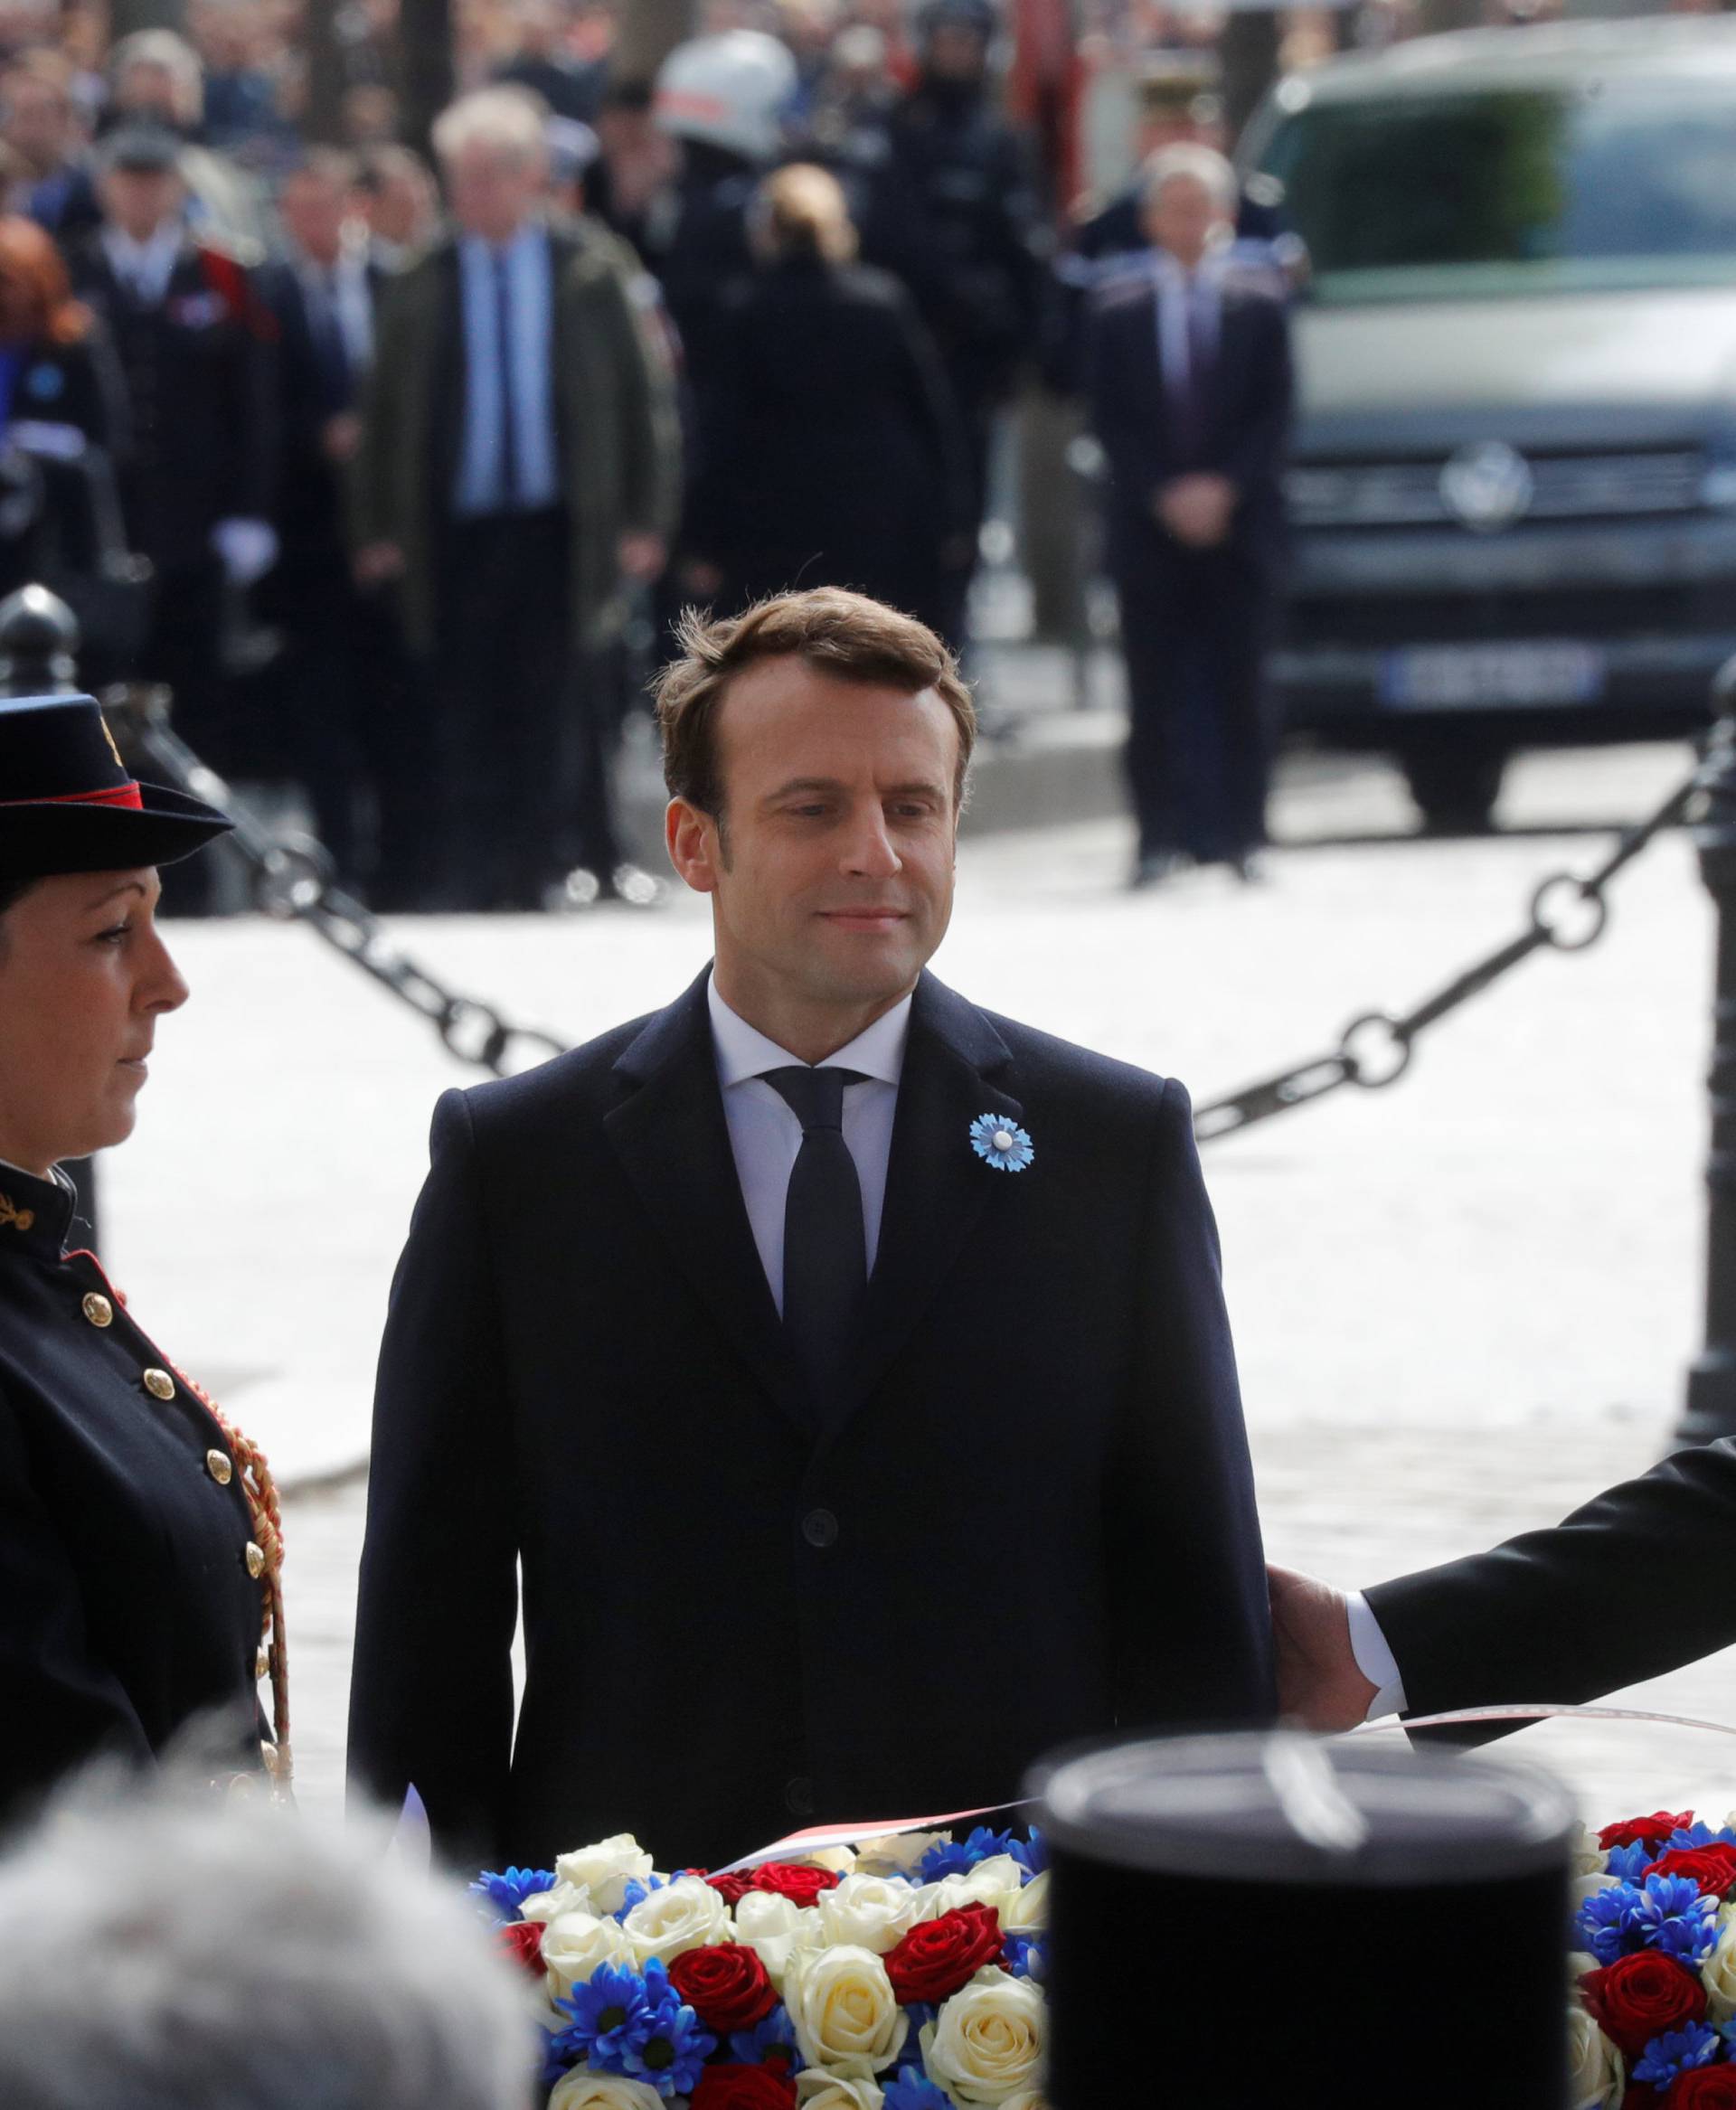 Outgoing French President Francois Hollande and President-elect Emmanuel Macron attend a ceremony to mark the end of World War II at the Tomb of the Unknown Soldier at the Arc de Triomphe in Paris